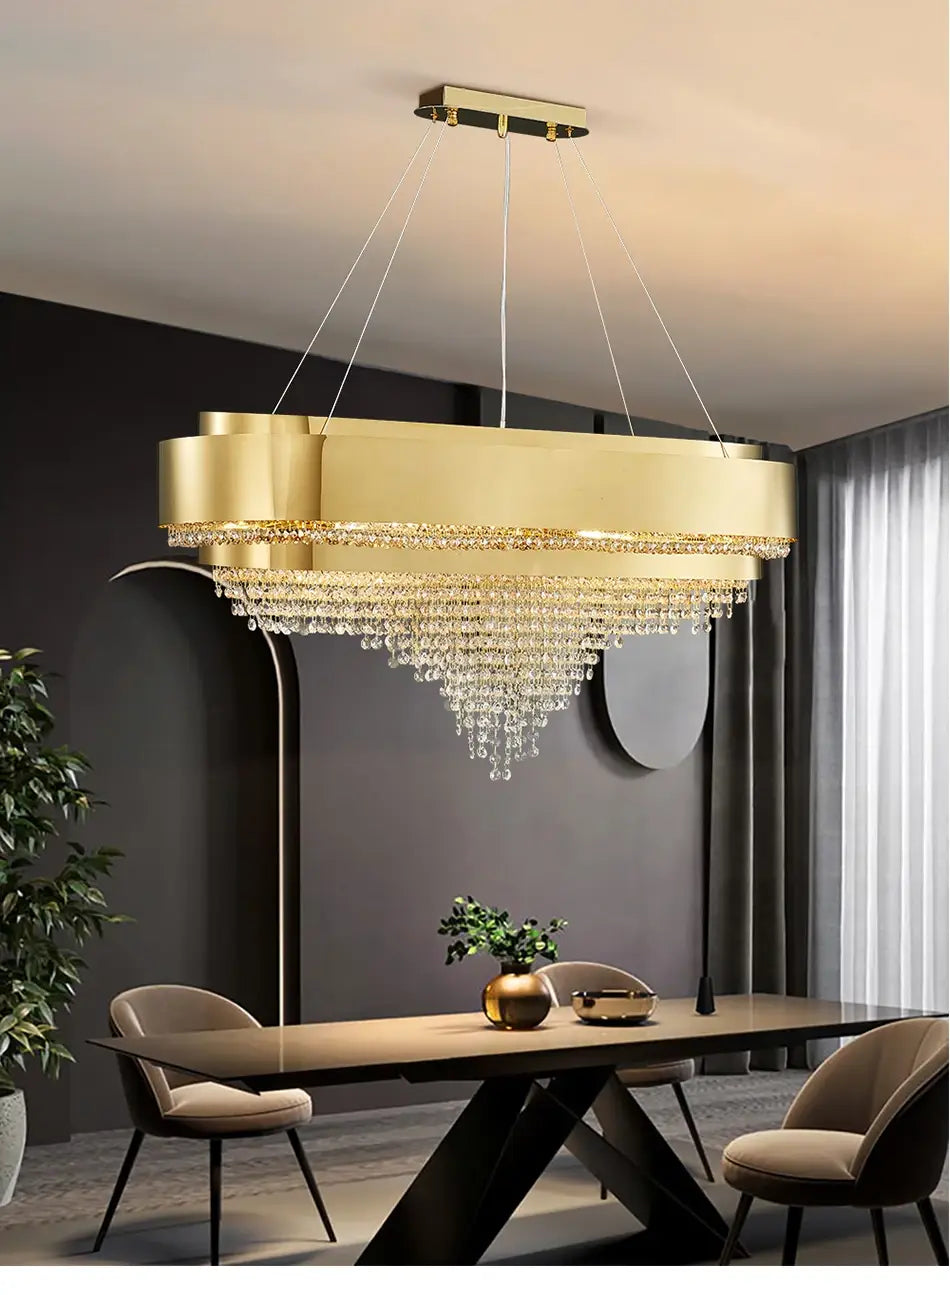 Luxury Gold Oval Crystal Chandelier for Dining, Kitchen island